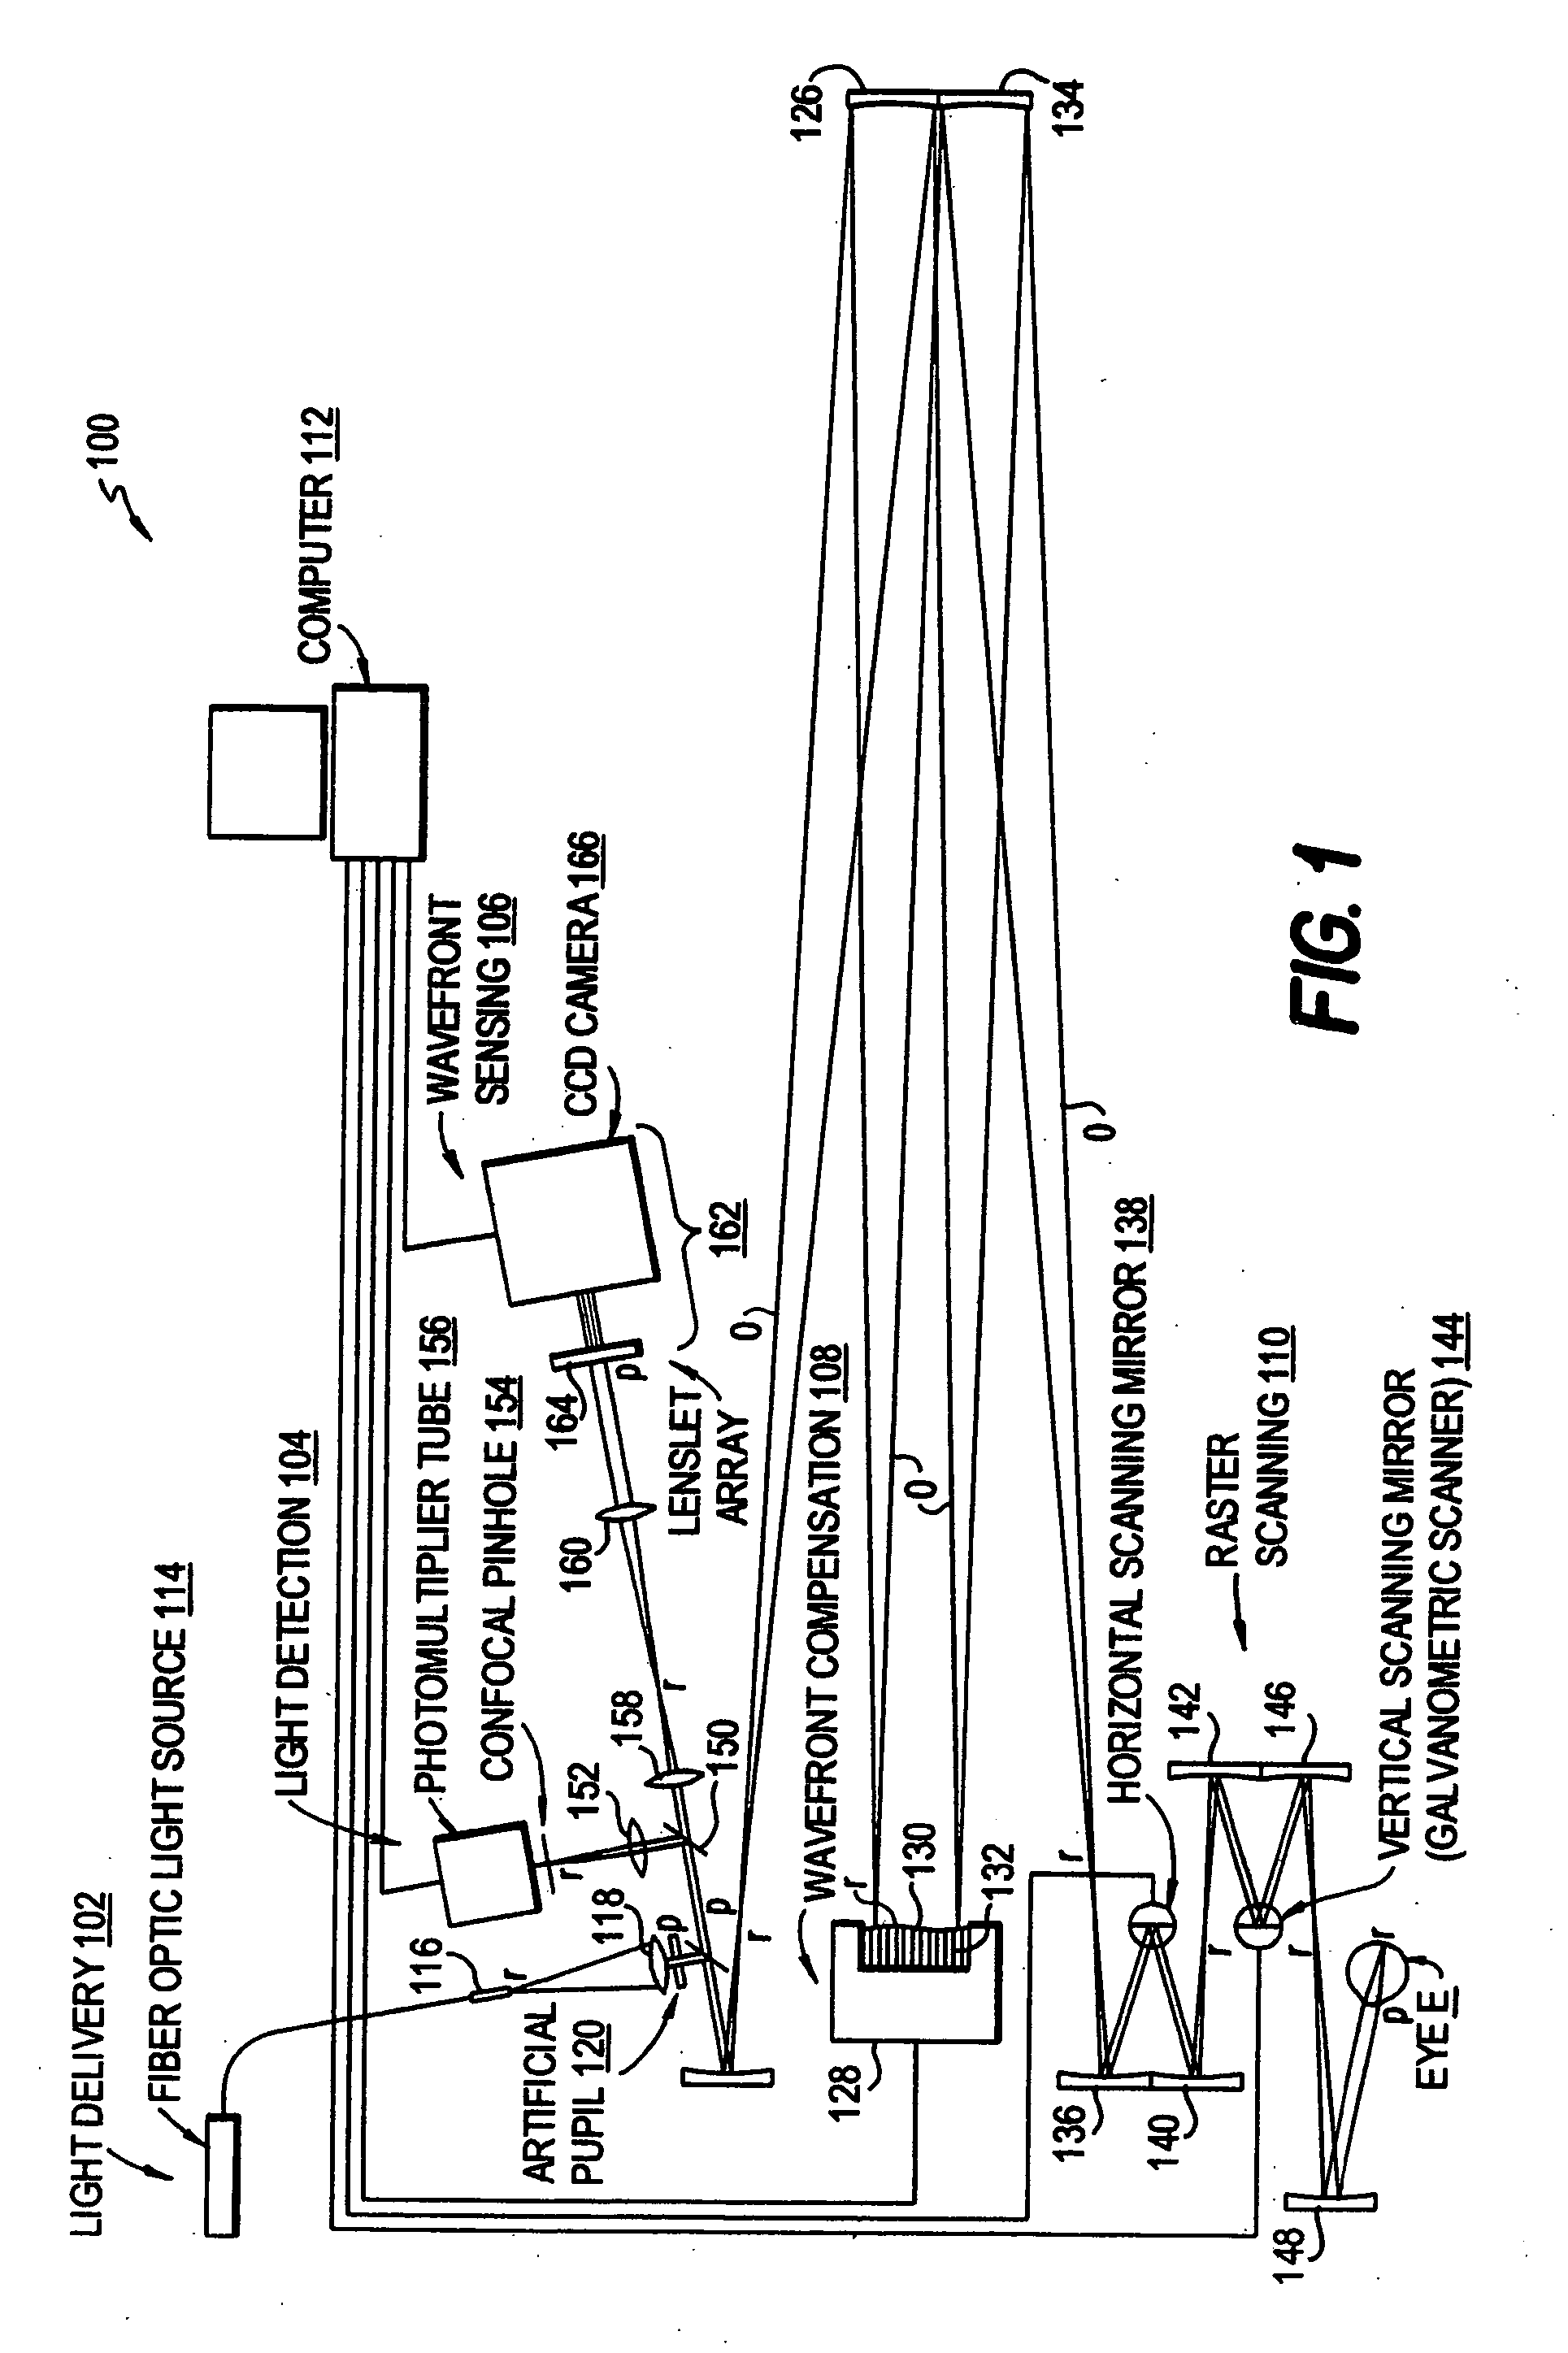 Method and apparatus for using adaptive optics in a scanning laser ophthalmoscope